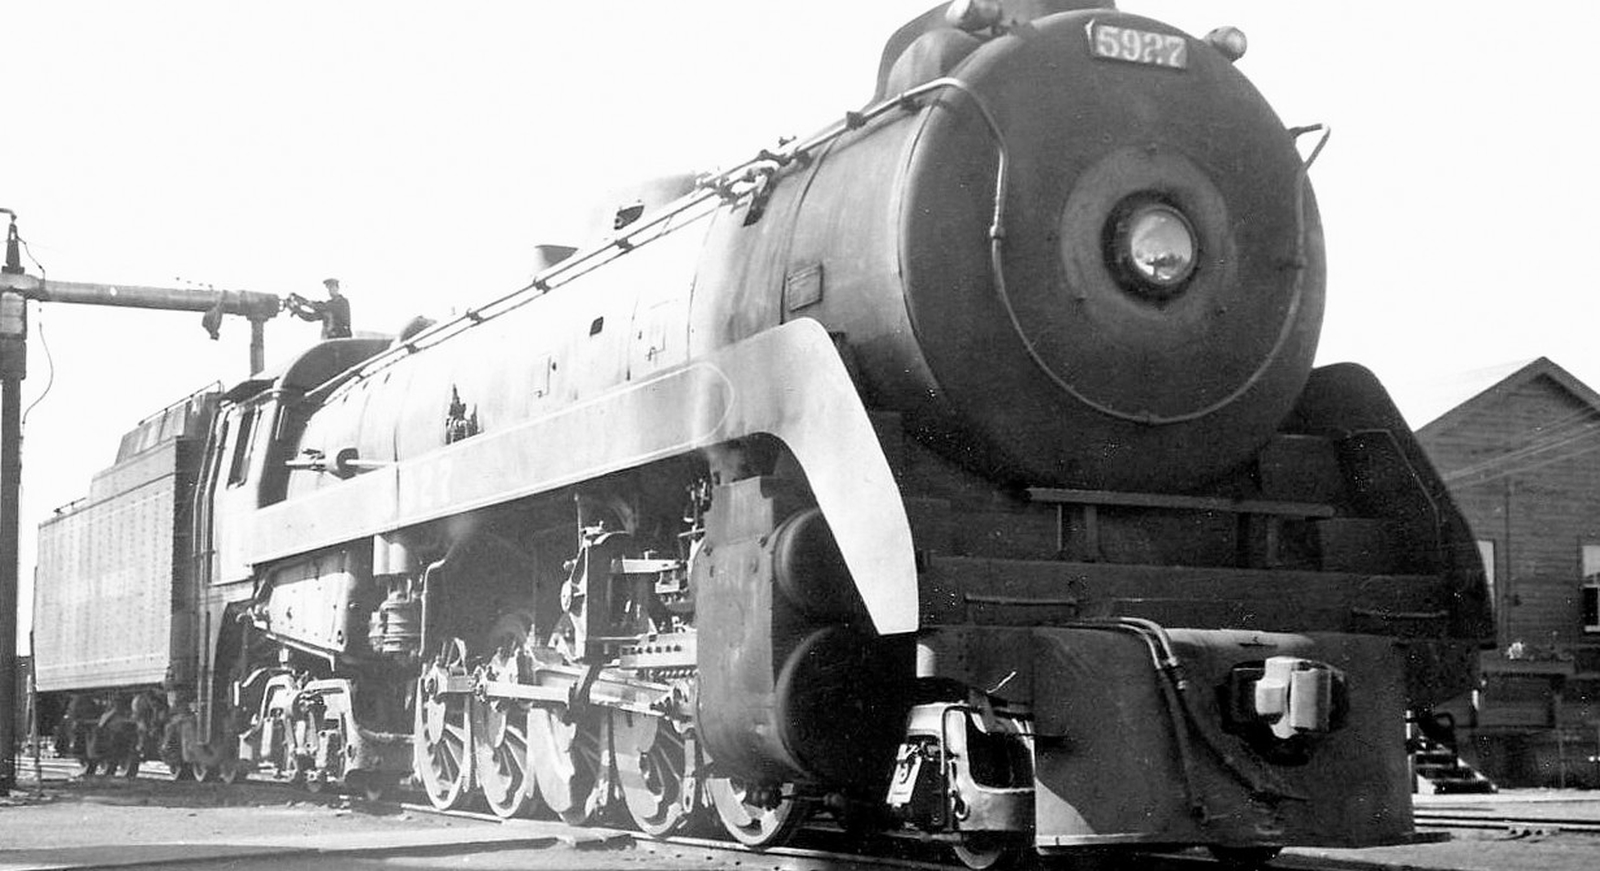 No. 5927 refueling in South Edmonton in the summer of 1957